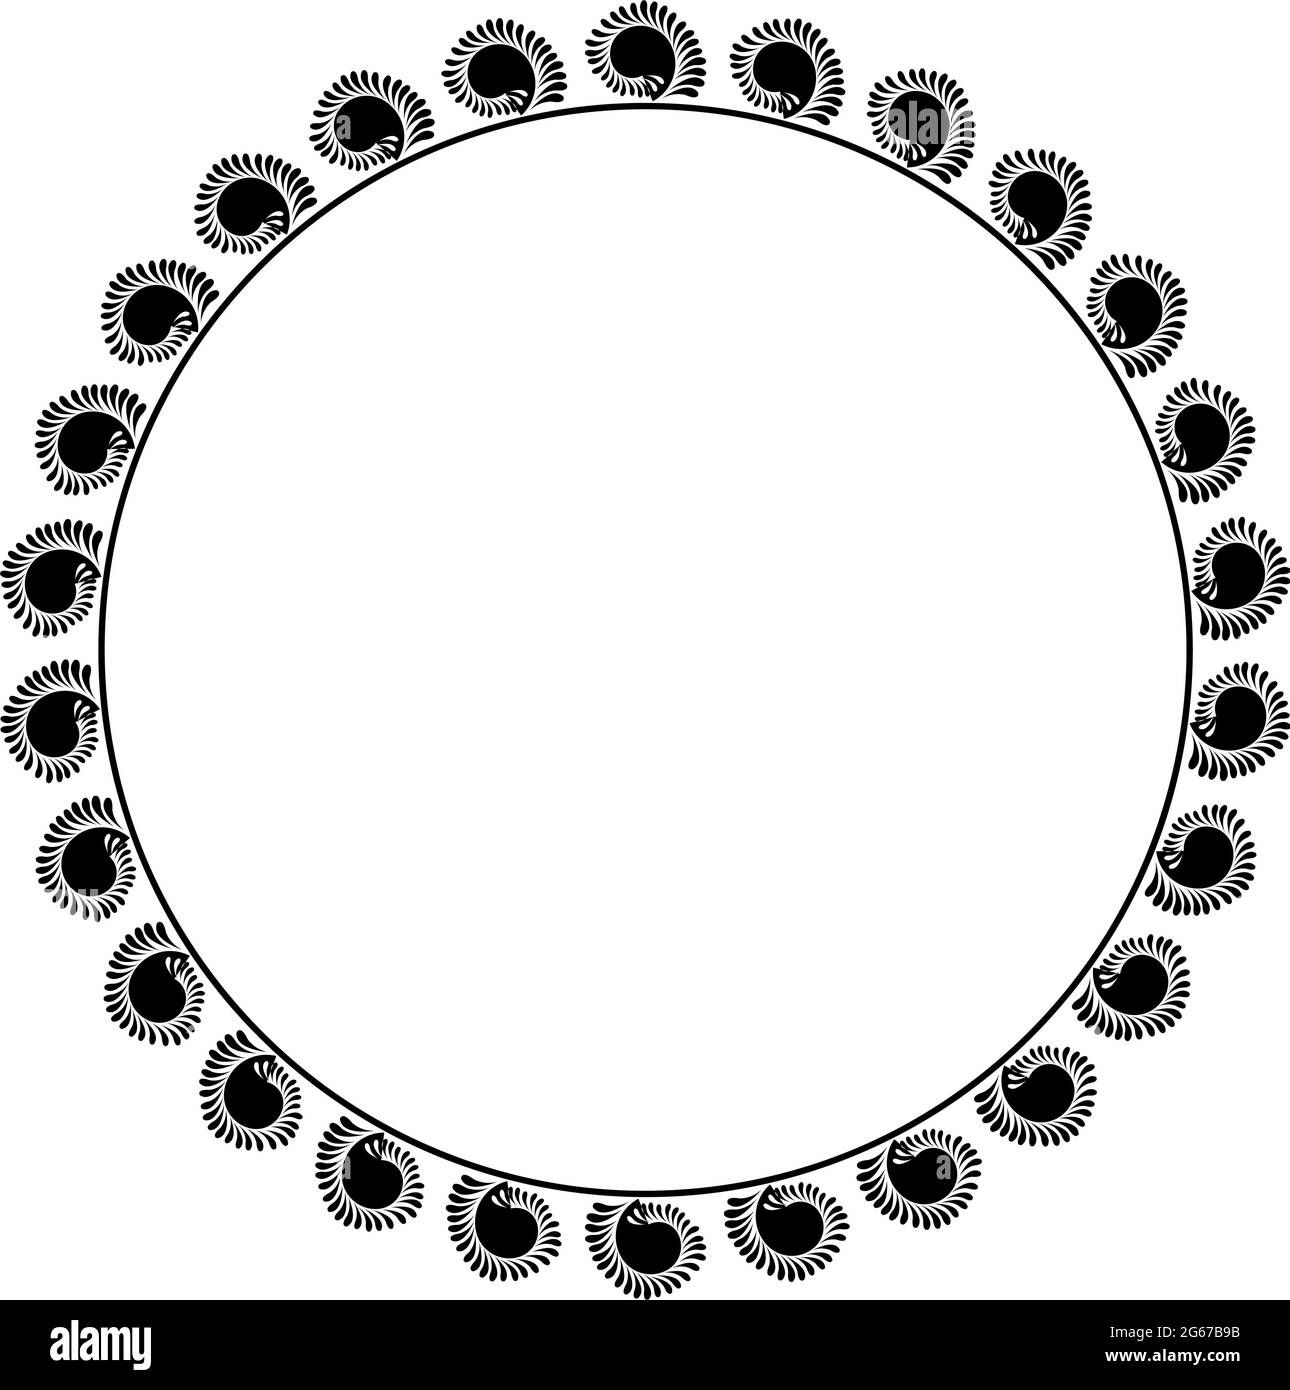 Floral round frame design concept isolated on white background - vector illustration Stock Vector